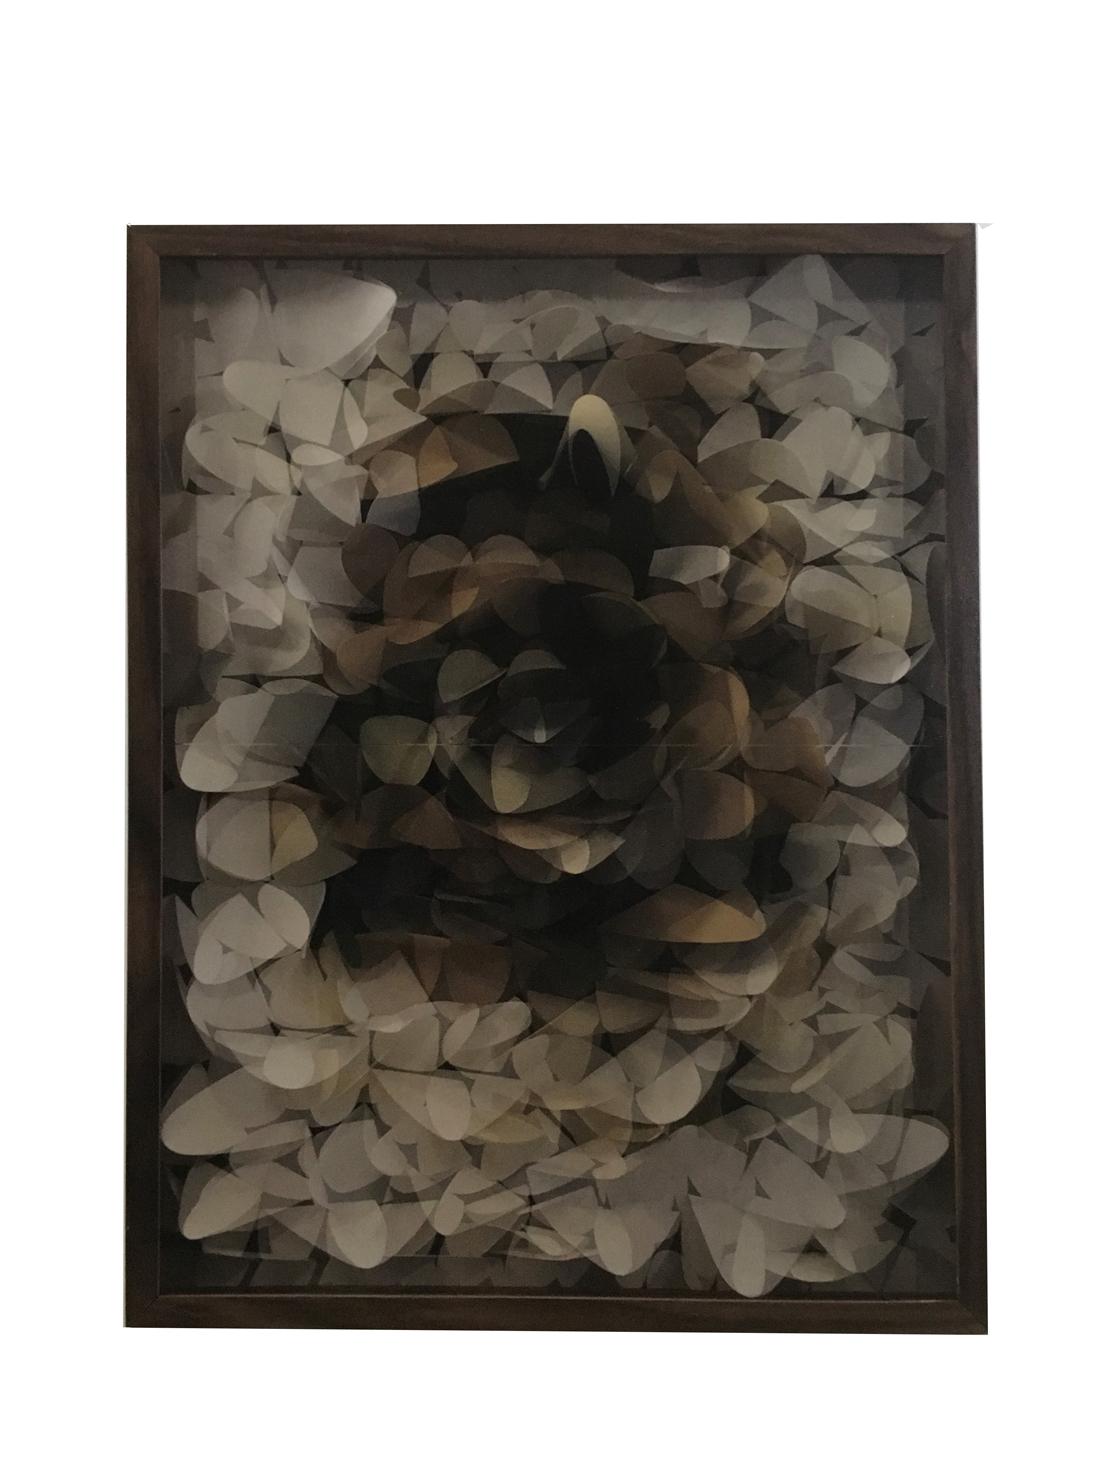 Maurizio Donzelli Abstract Painting - Italy Mixed Media Abstract Paper Flower Assemblage Under Lenticular Lens